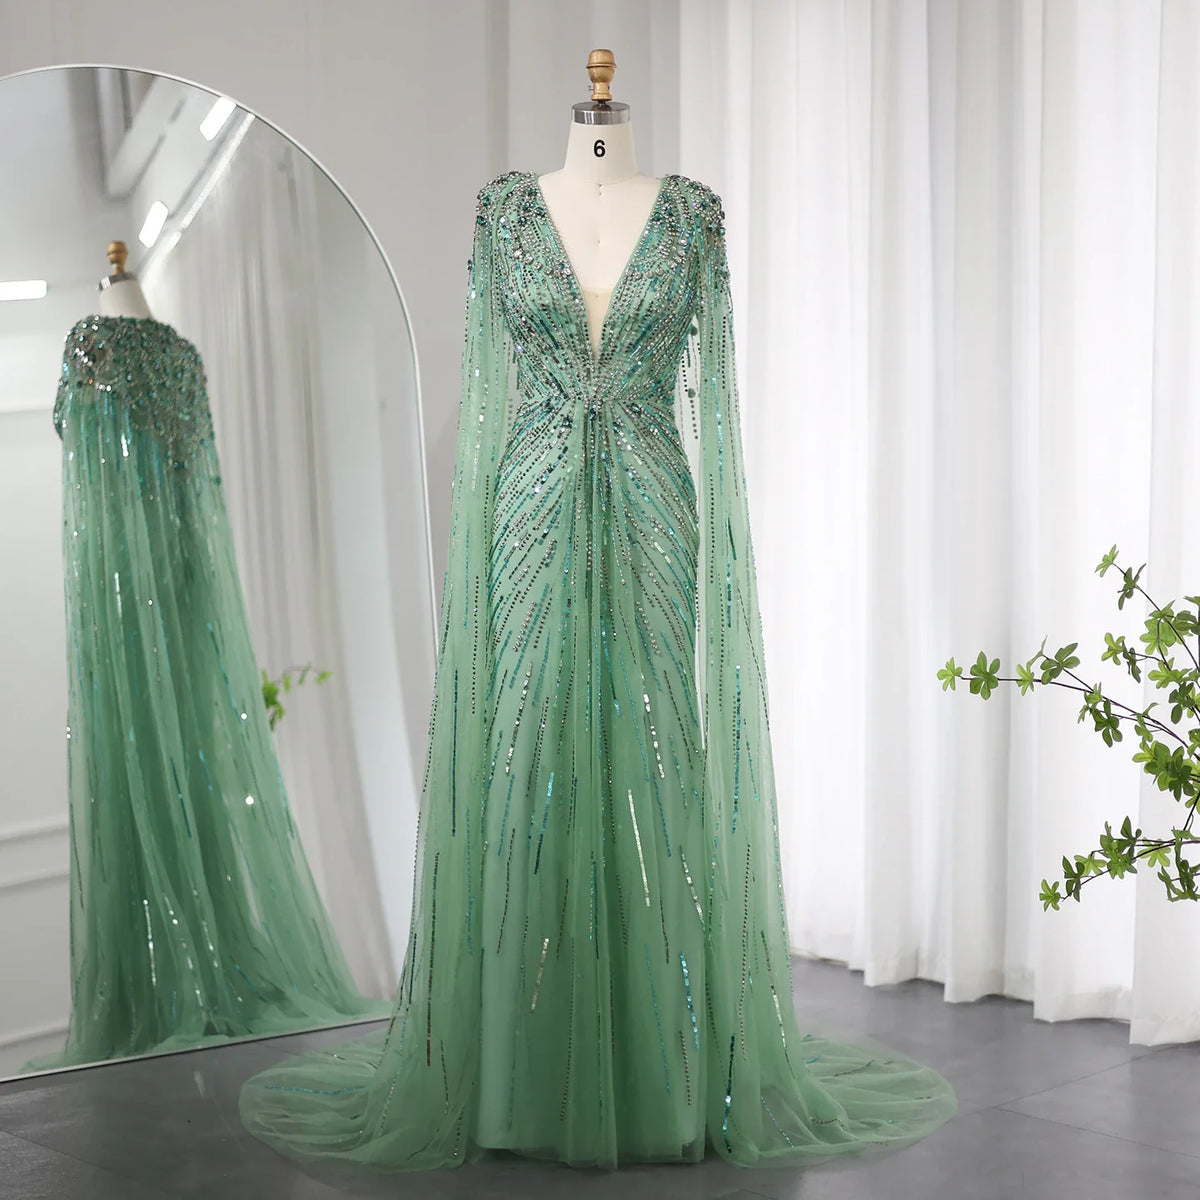 Dreamy Vow Luxury Dubai Sage Green Evening Dresses with Cape Fuchsia Crystal Gold Elegant Women Wedding Formal Party Gown 399